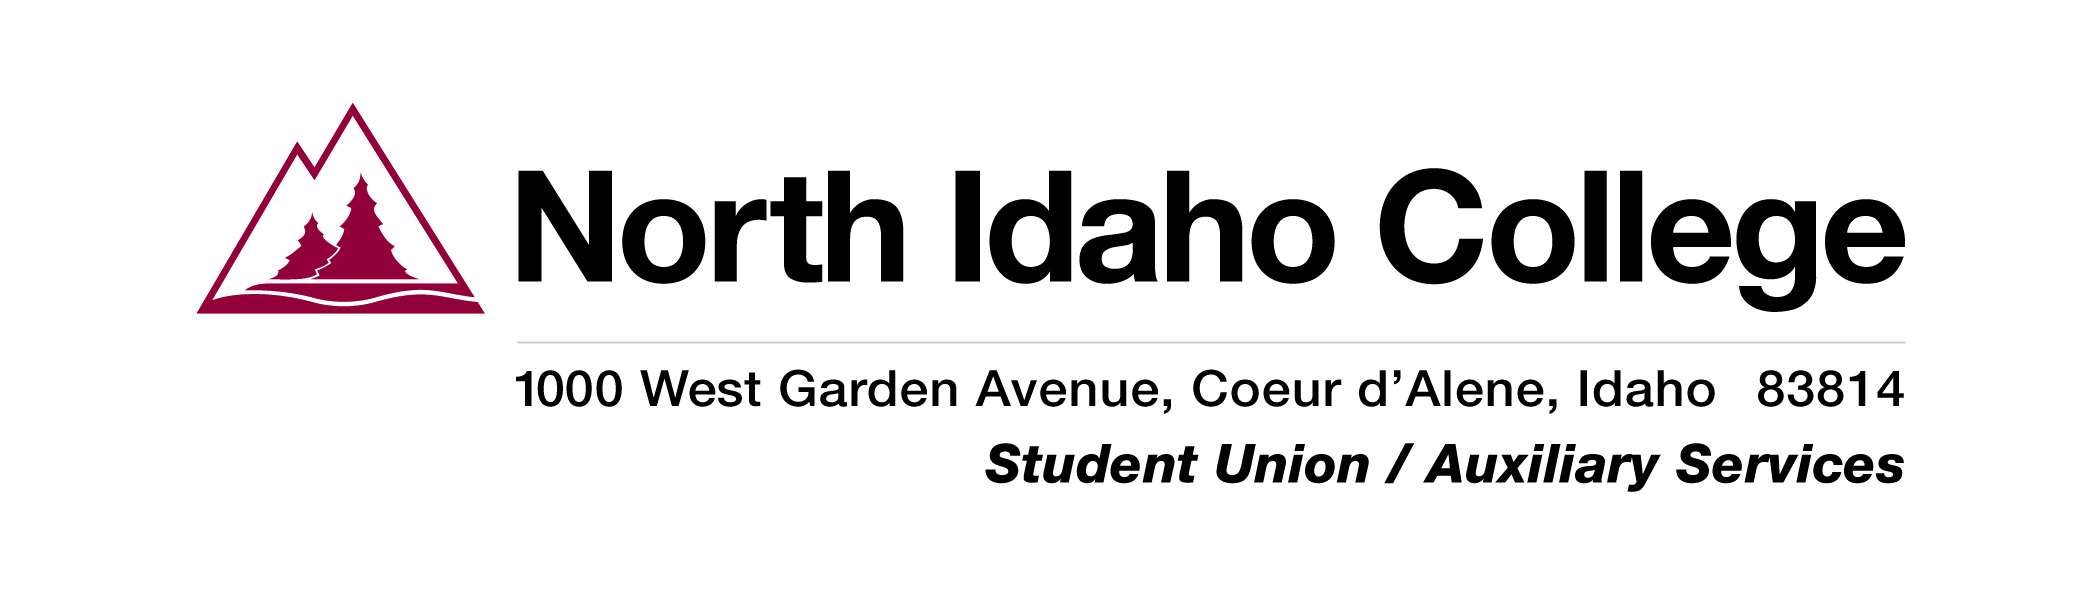 NIC Logo with Student Union department and address